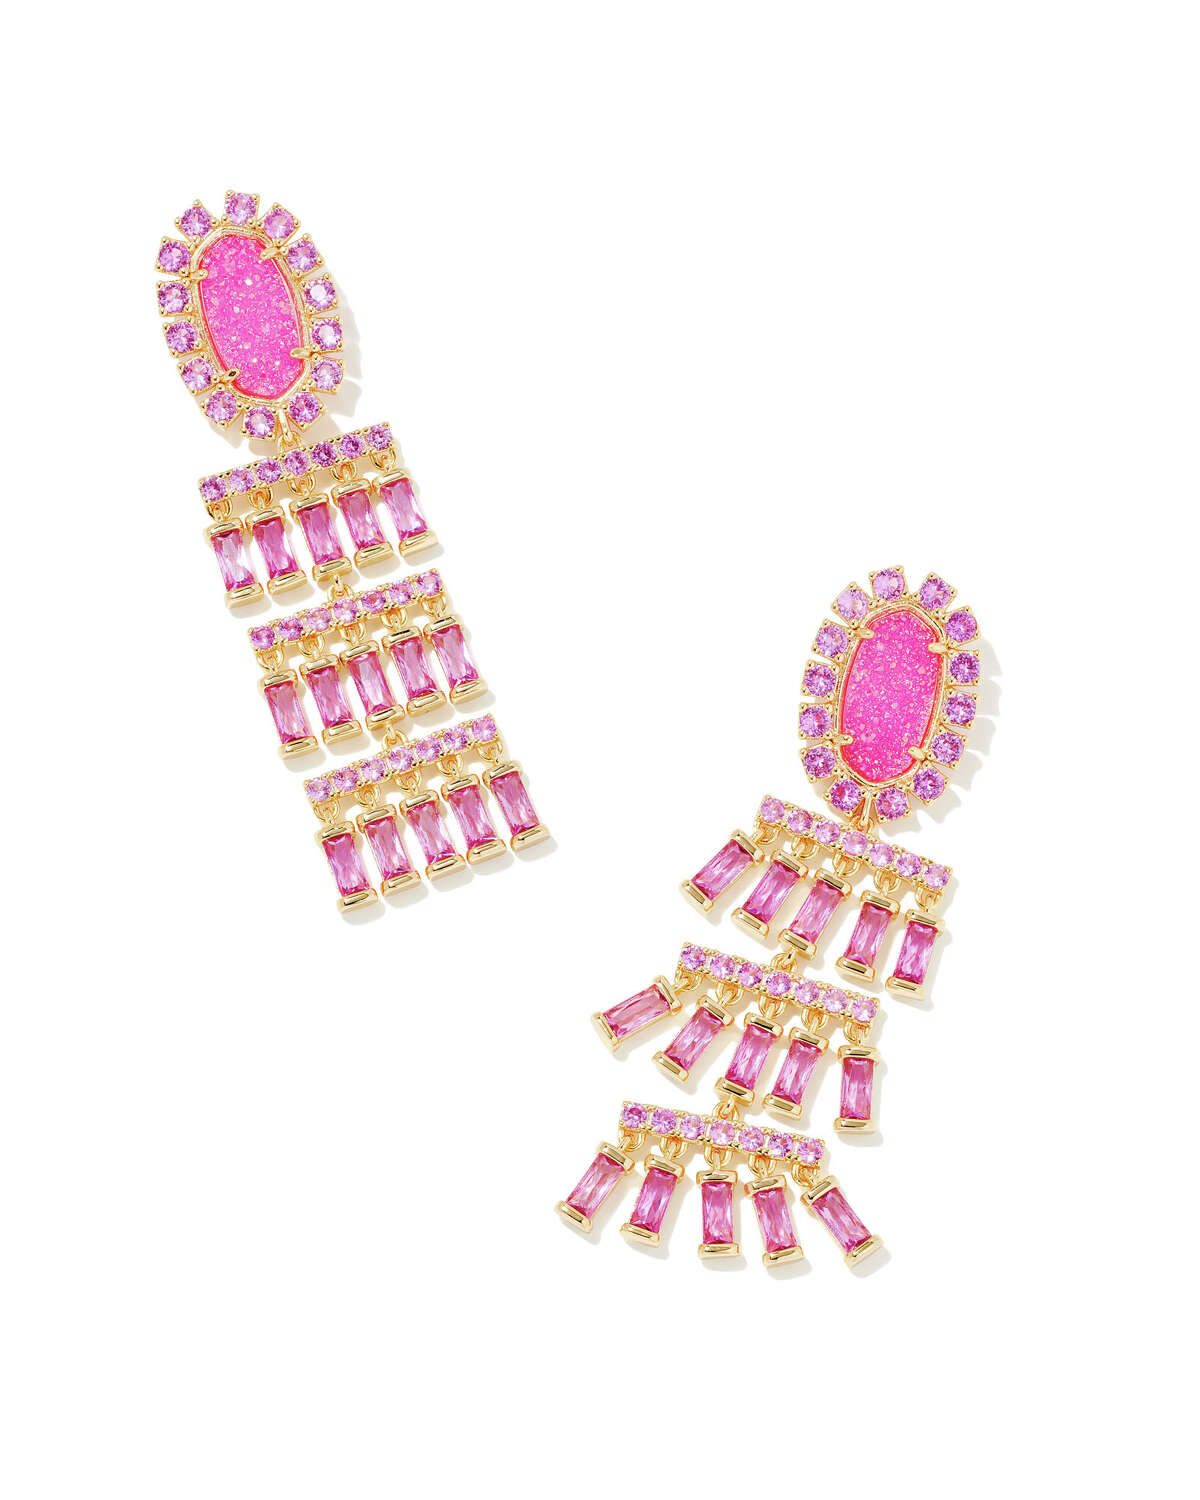 Kendra Scott is launching a Barbie™ x Kendra Scott collection on November 16th.  